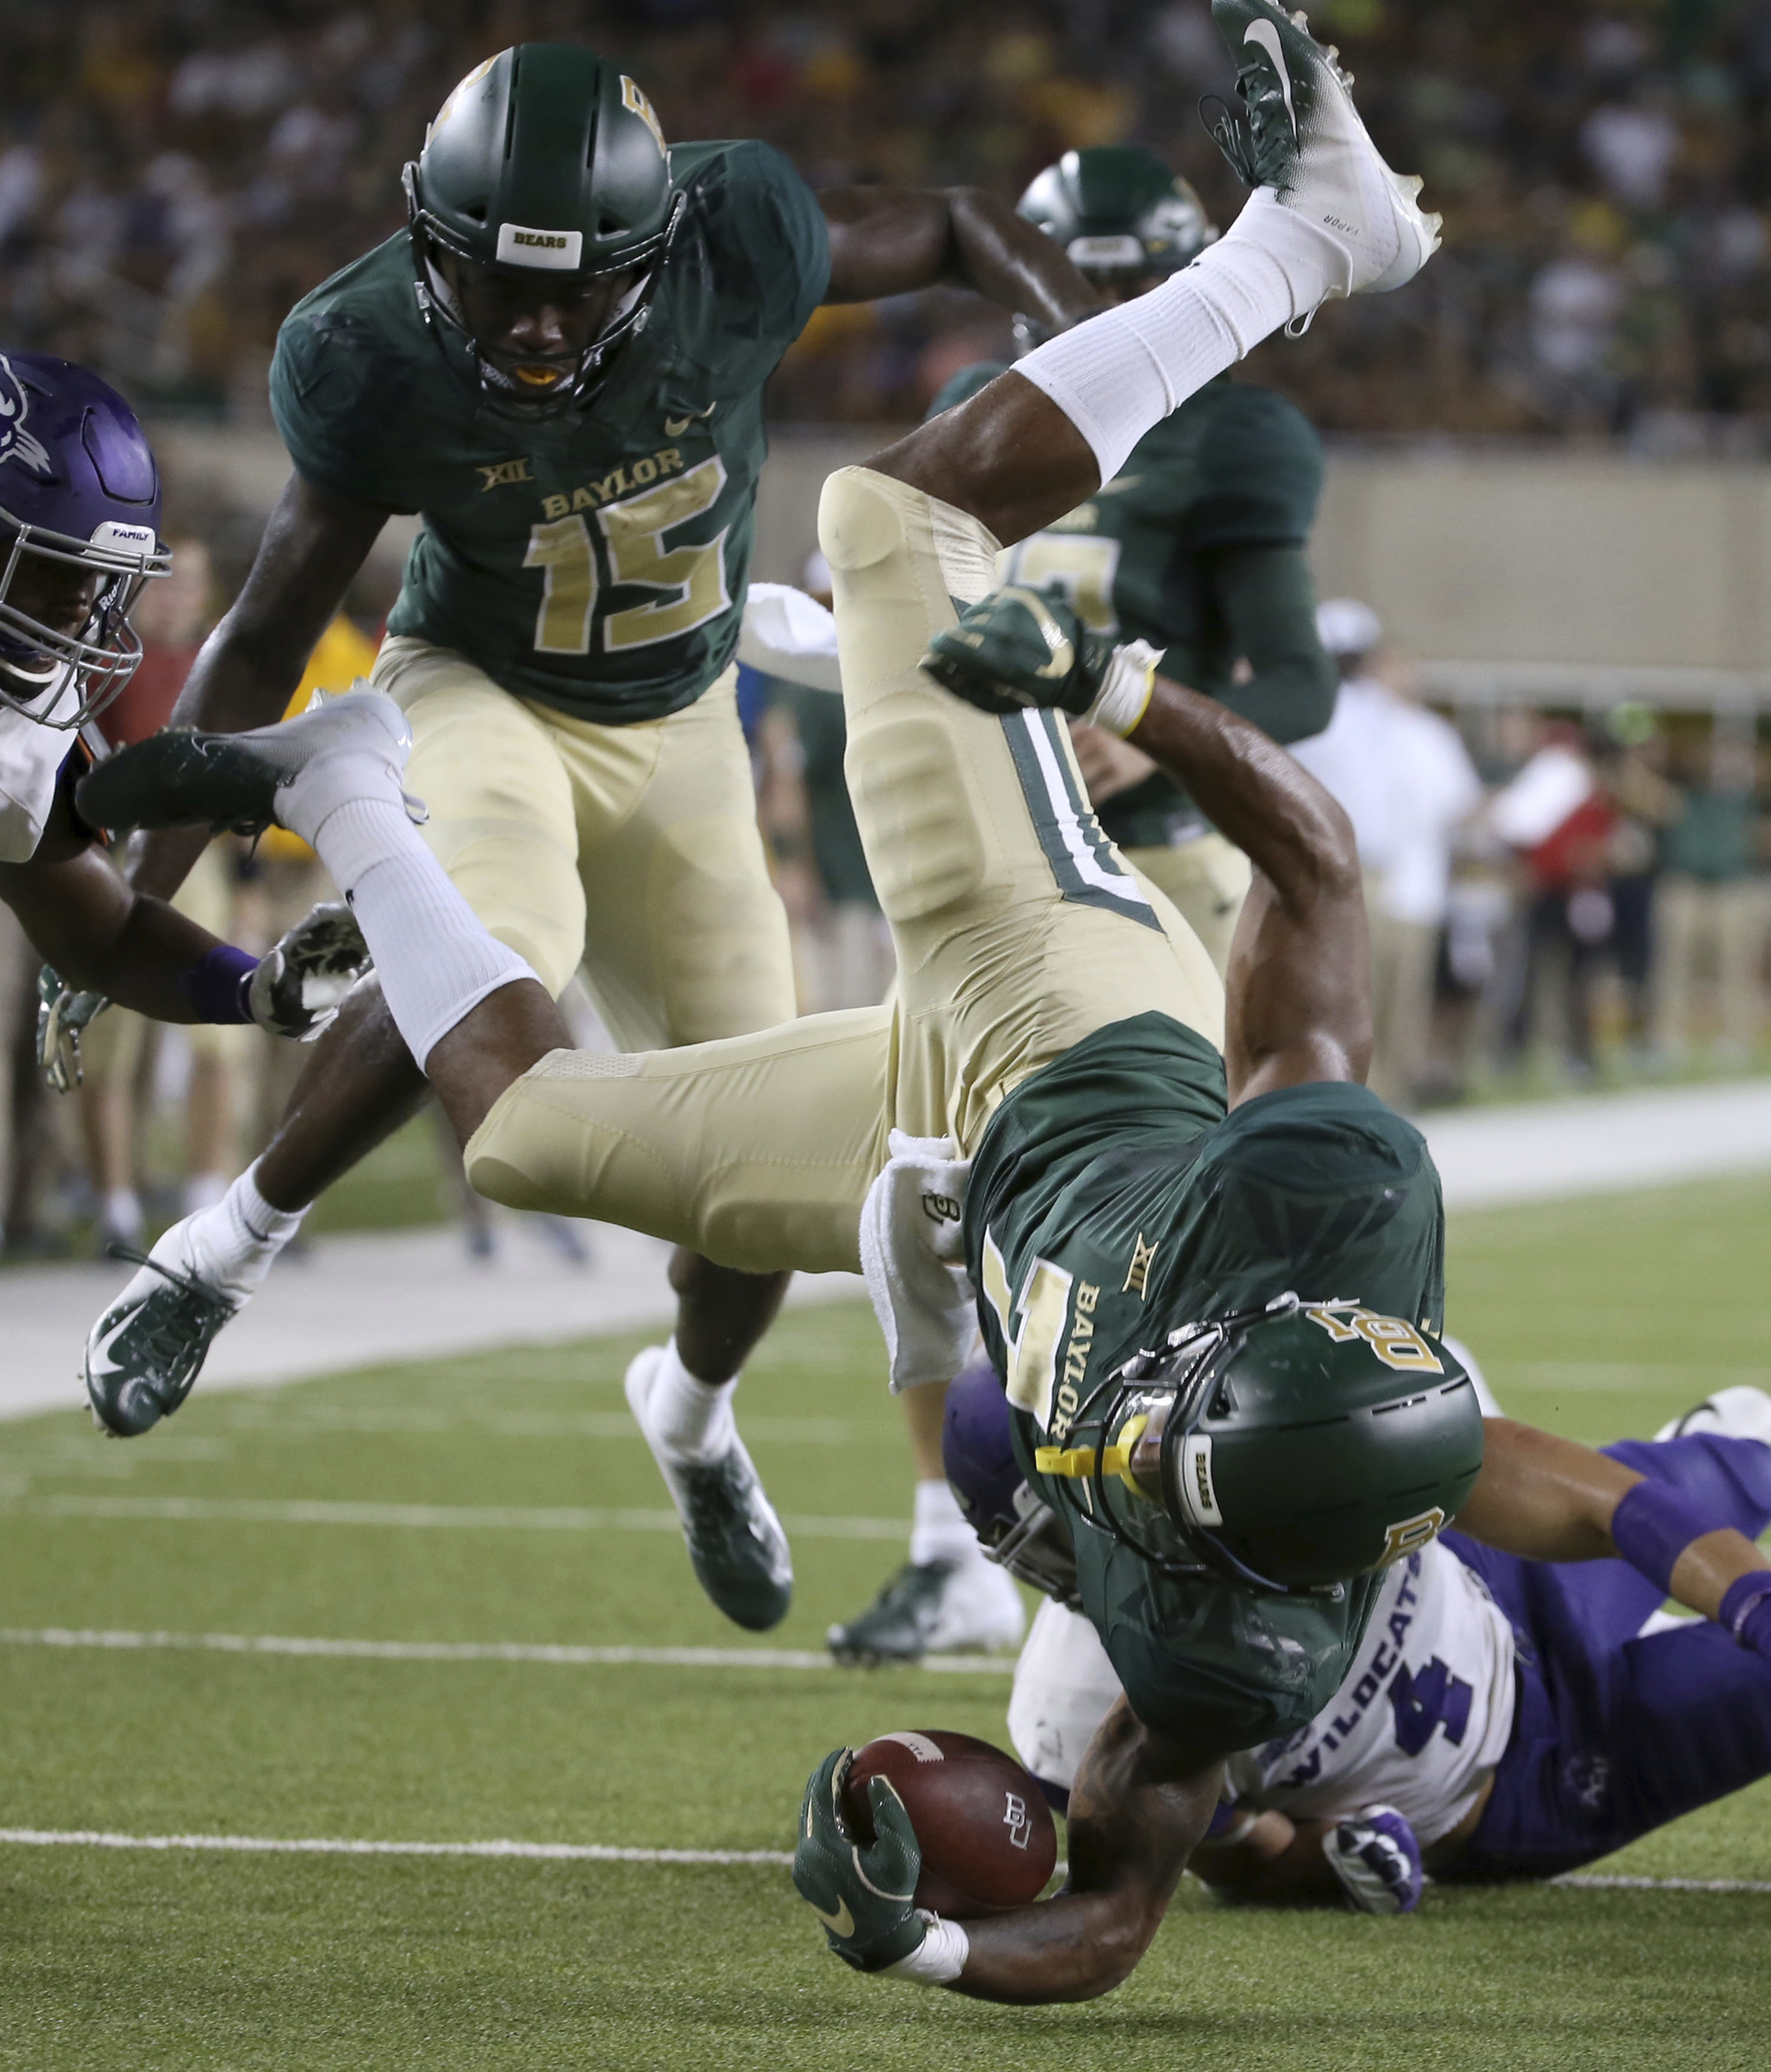 Baylor ends 8-game home losing streak in 55-27 win over ACU